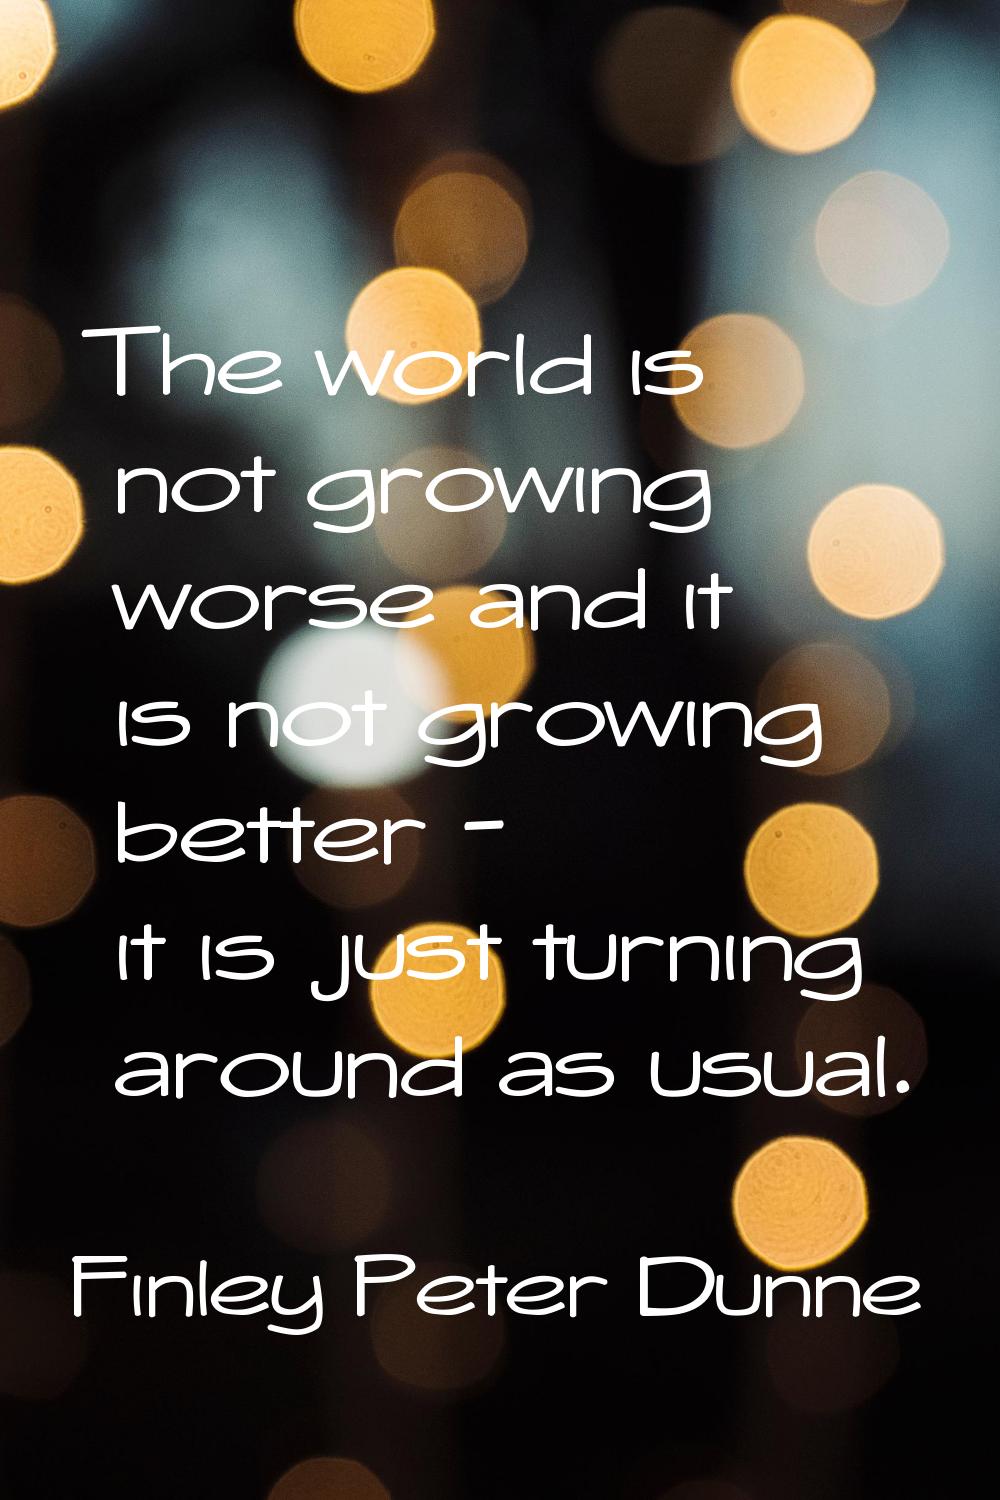 The world is not growing worse and it is not growing better - it is just turning around as usual.